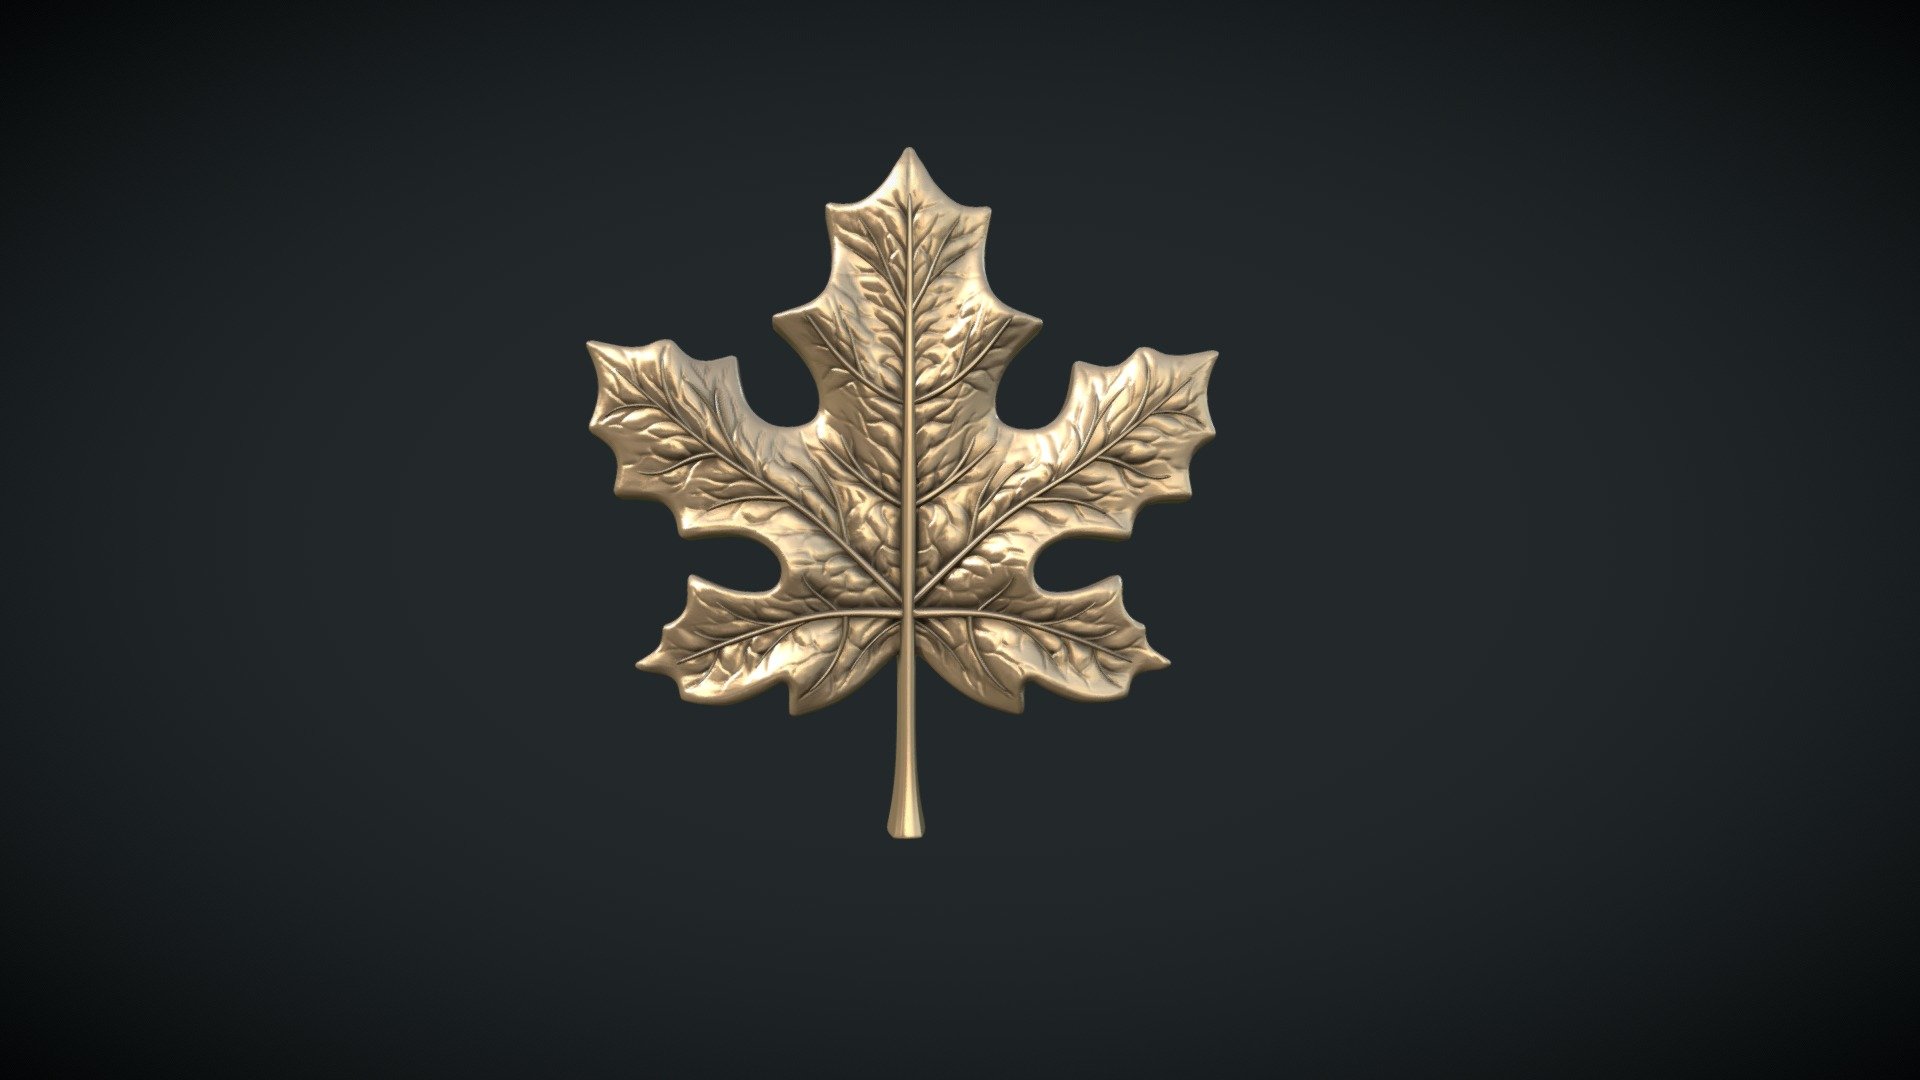 Print ready Maple Leaf.

Measure units are meters, it is about 3 cm in height. 

Mesh is manifold, has no bad contiguous edges.

============================================================

Available formats: .blend, .fbx, .stl, .obj, .dae., .3ds

Mesh consists of 327286 triangular faces. 

============================================================

Simple Cycles materials that can be used for rendering are available in .blend file 3d model